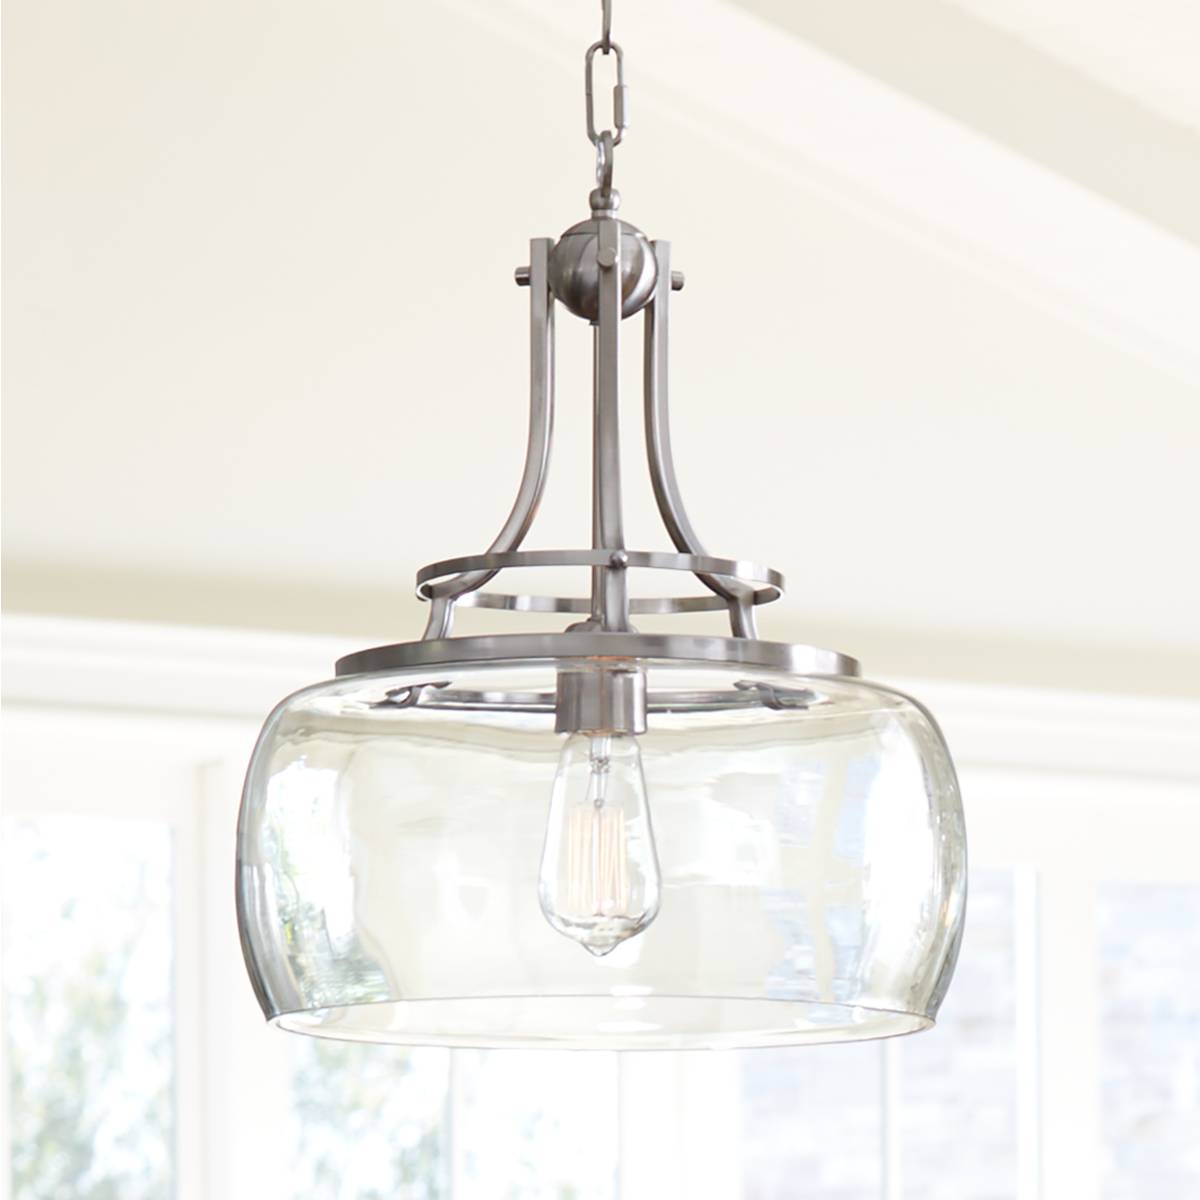 Charleston 13 And One Half Wide Brushed Nickel Clear Glass Led Pendant Light  7p203cropped ?qlt=70&wid=1200&hei=1200&fmt=jpeg